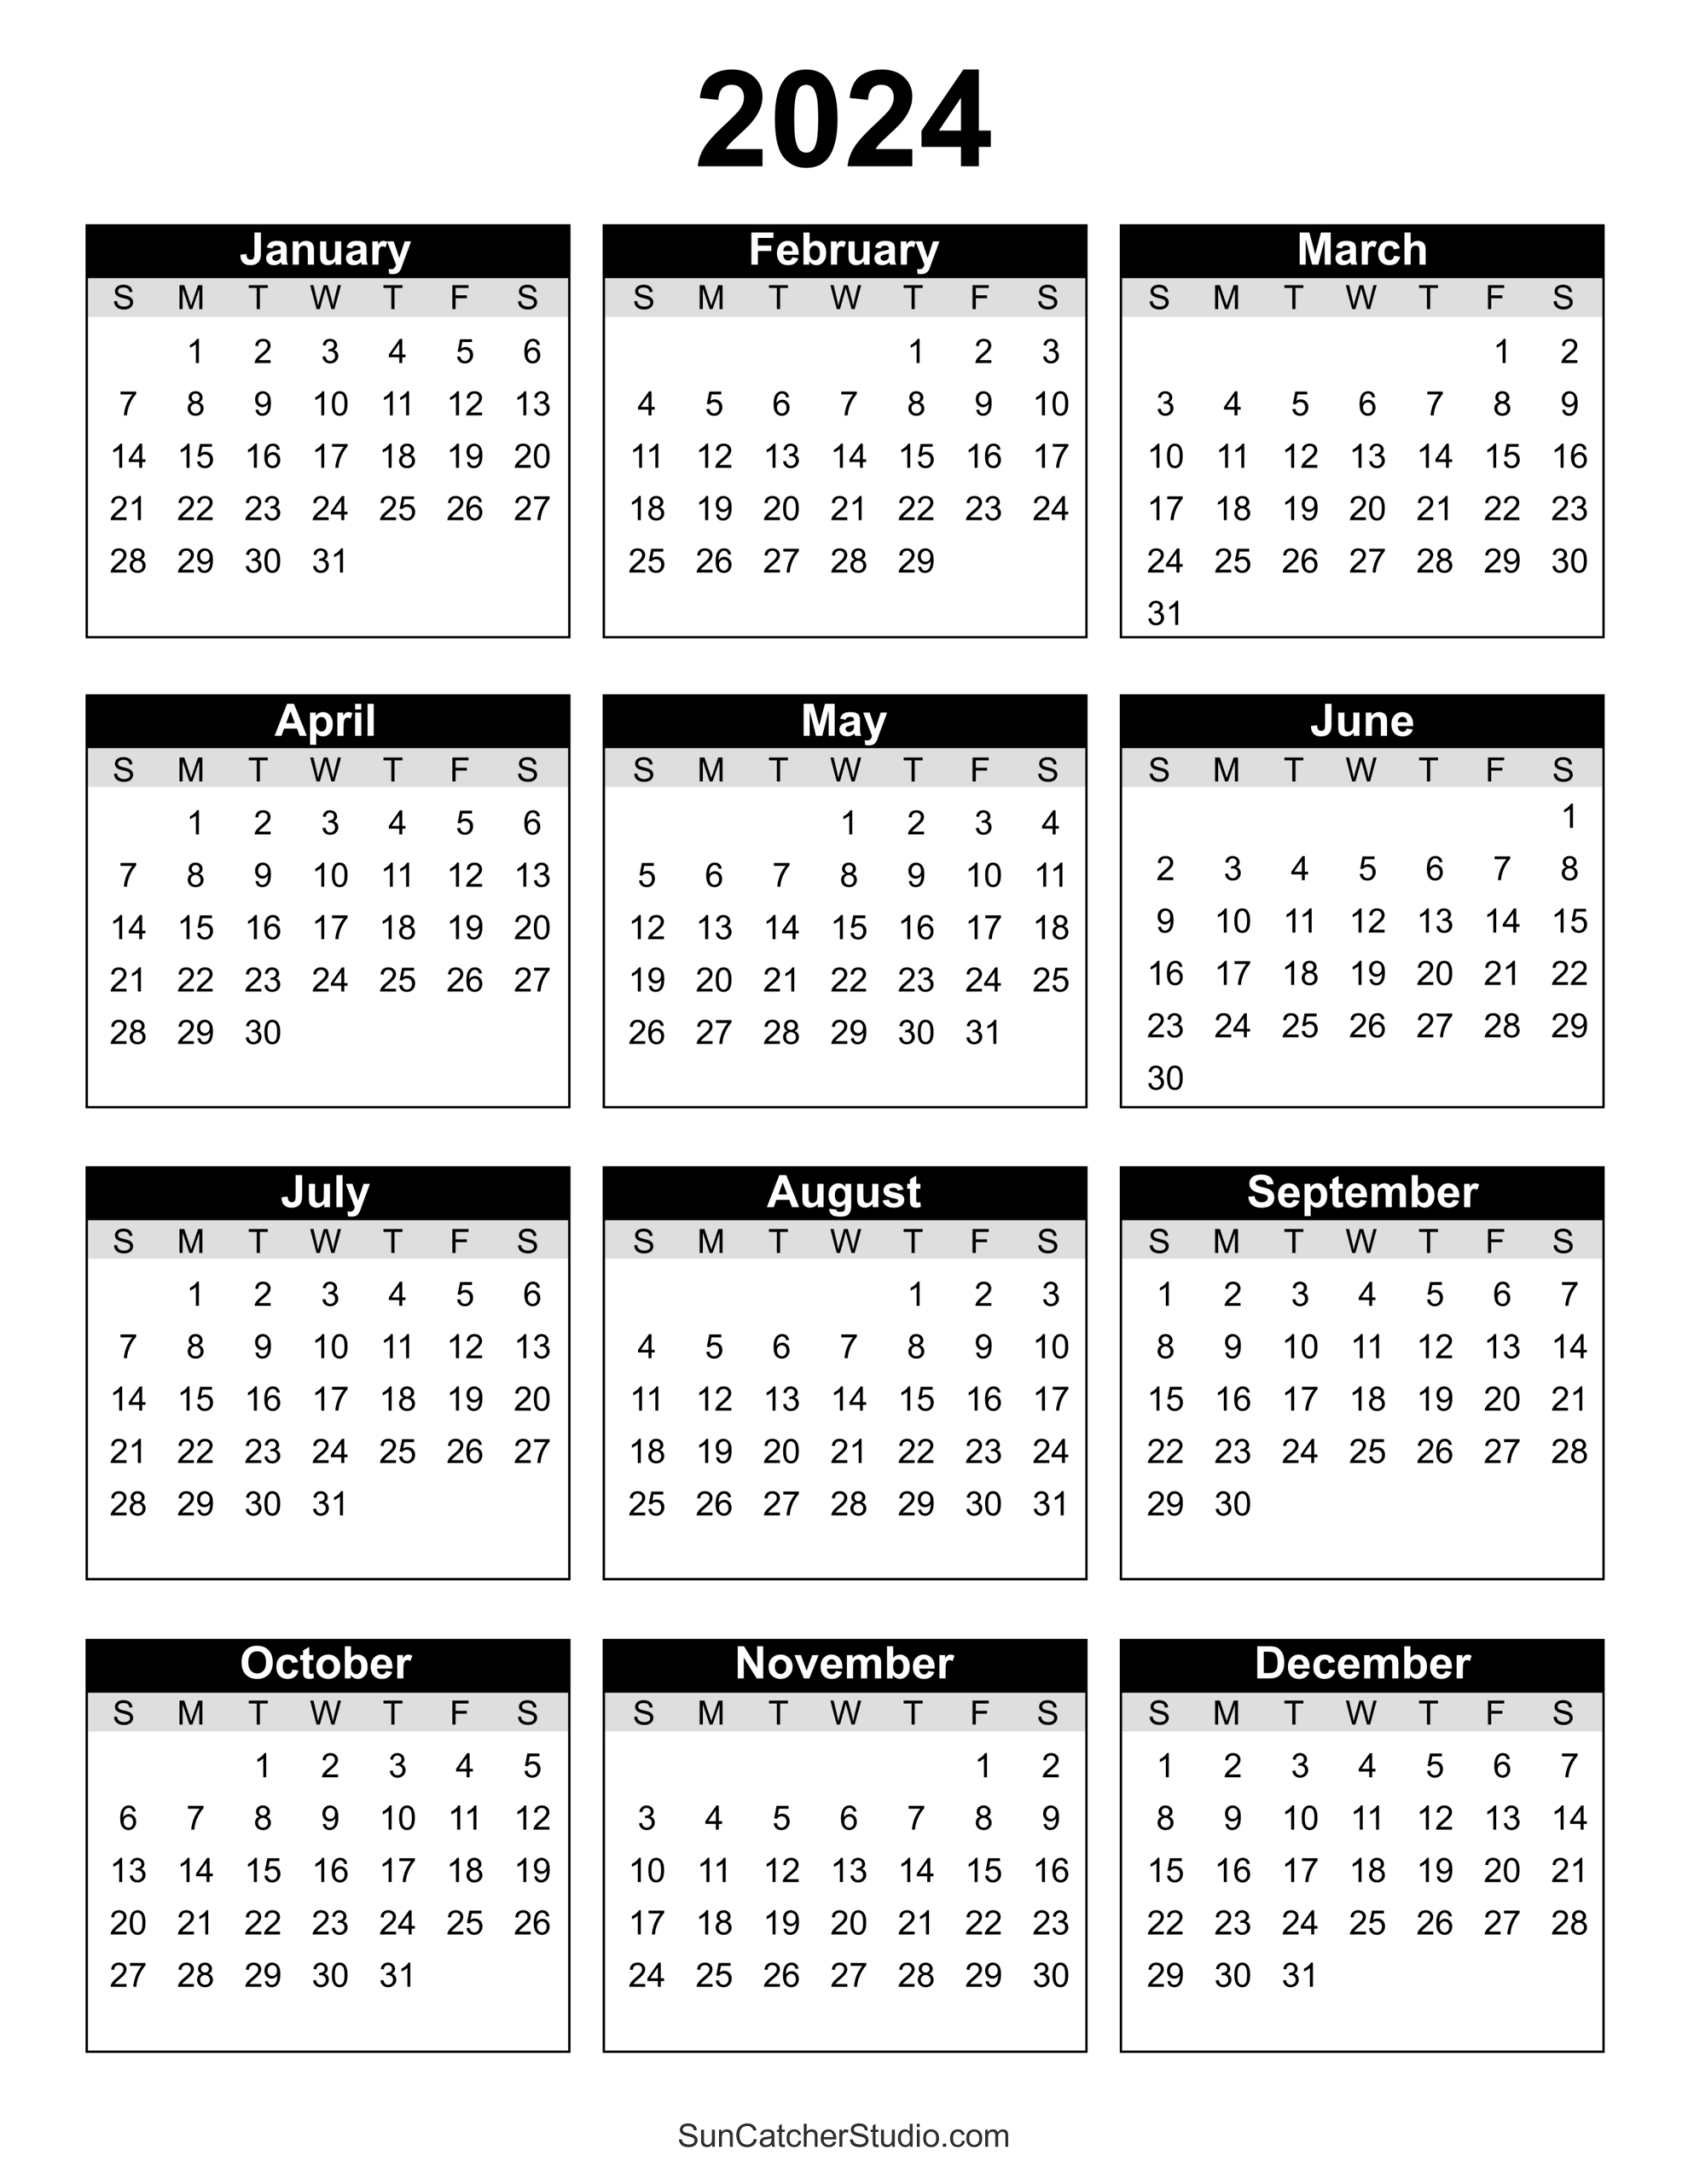 Free Printable 2024 Yearly Calendar – Diy Projects, Patterns | 2024 Yearly Calendar Free Printable